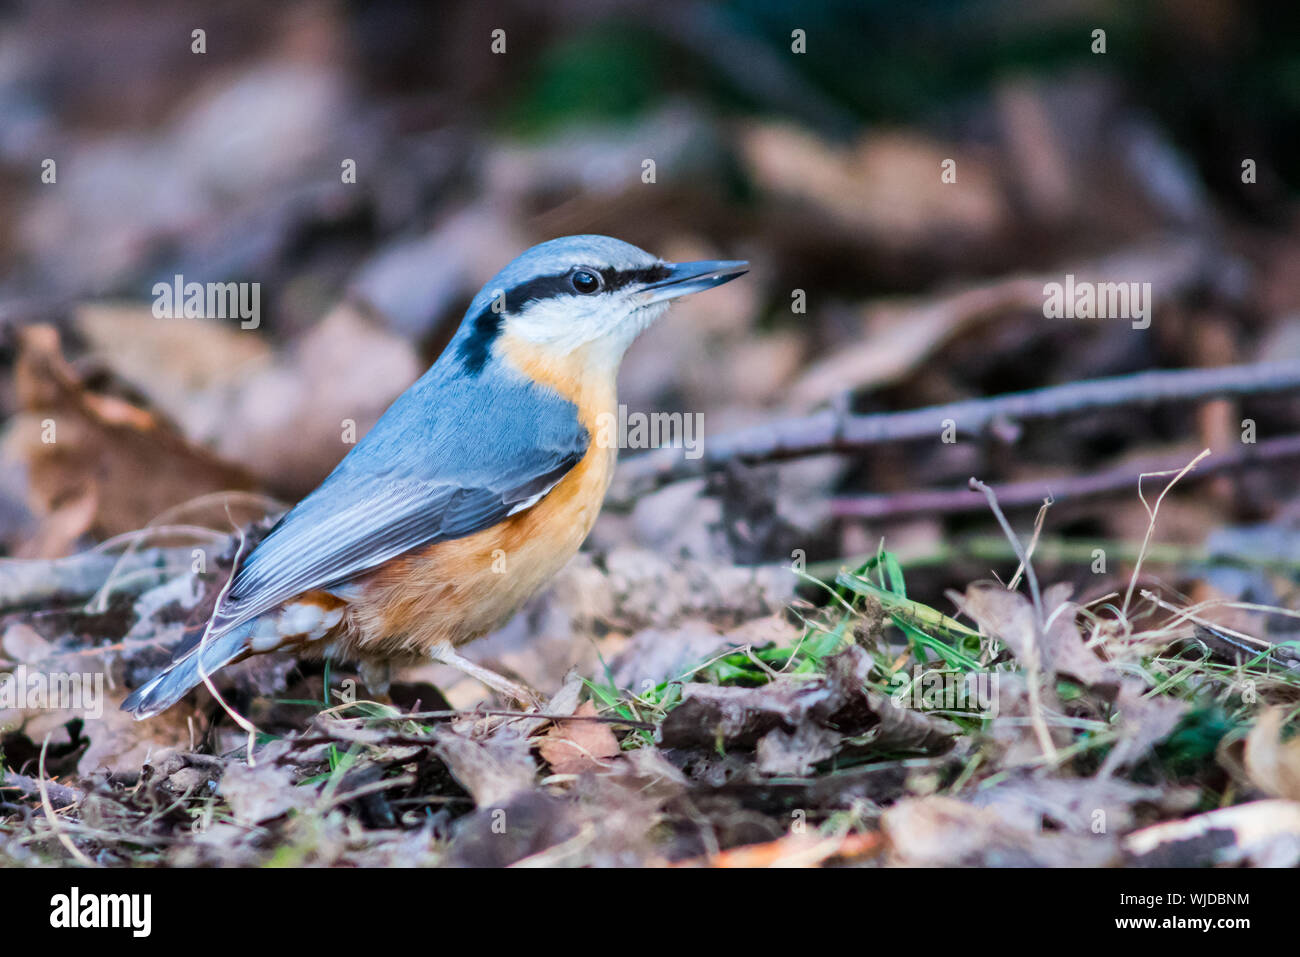 Nuthatch on the forest floor, side view Stock Photo